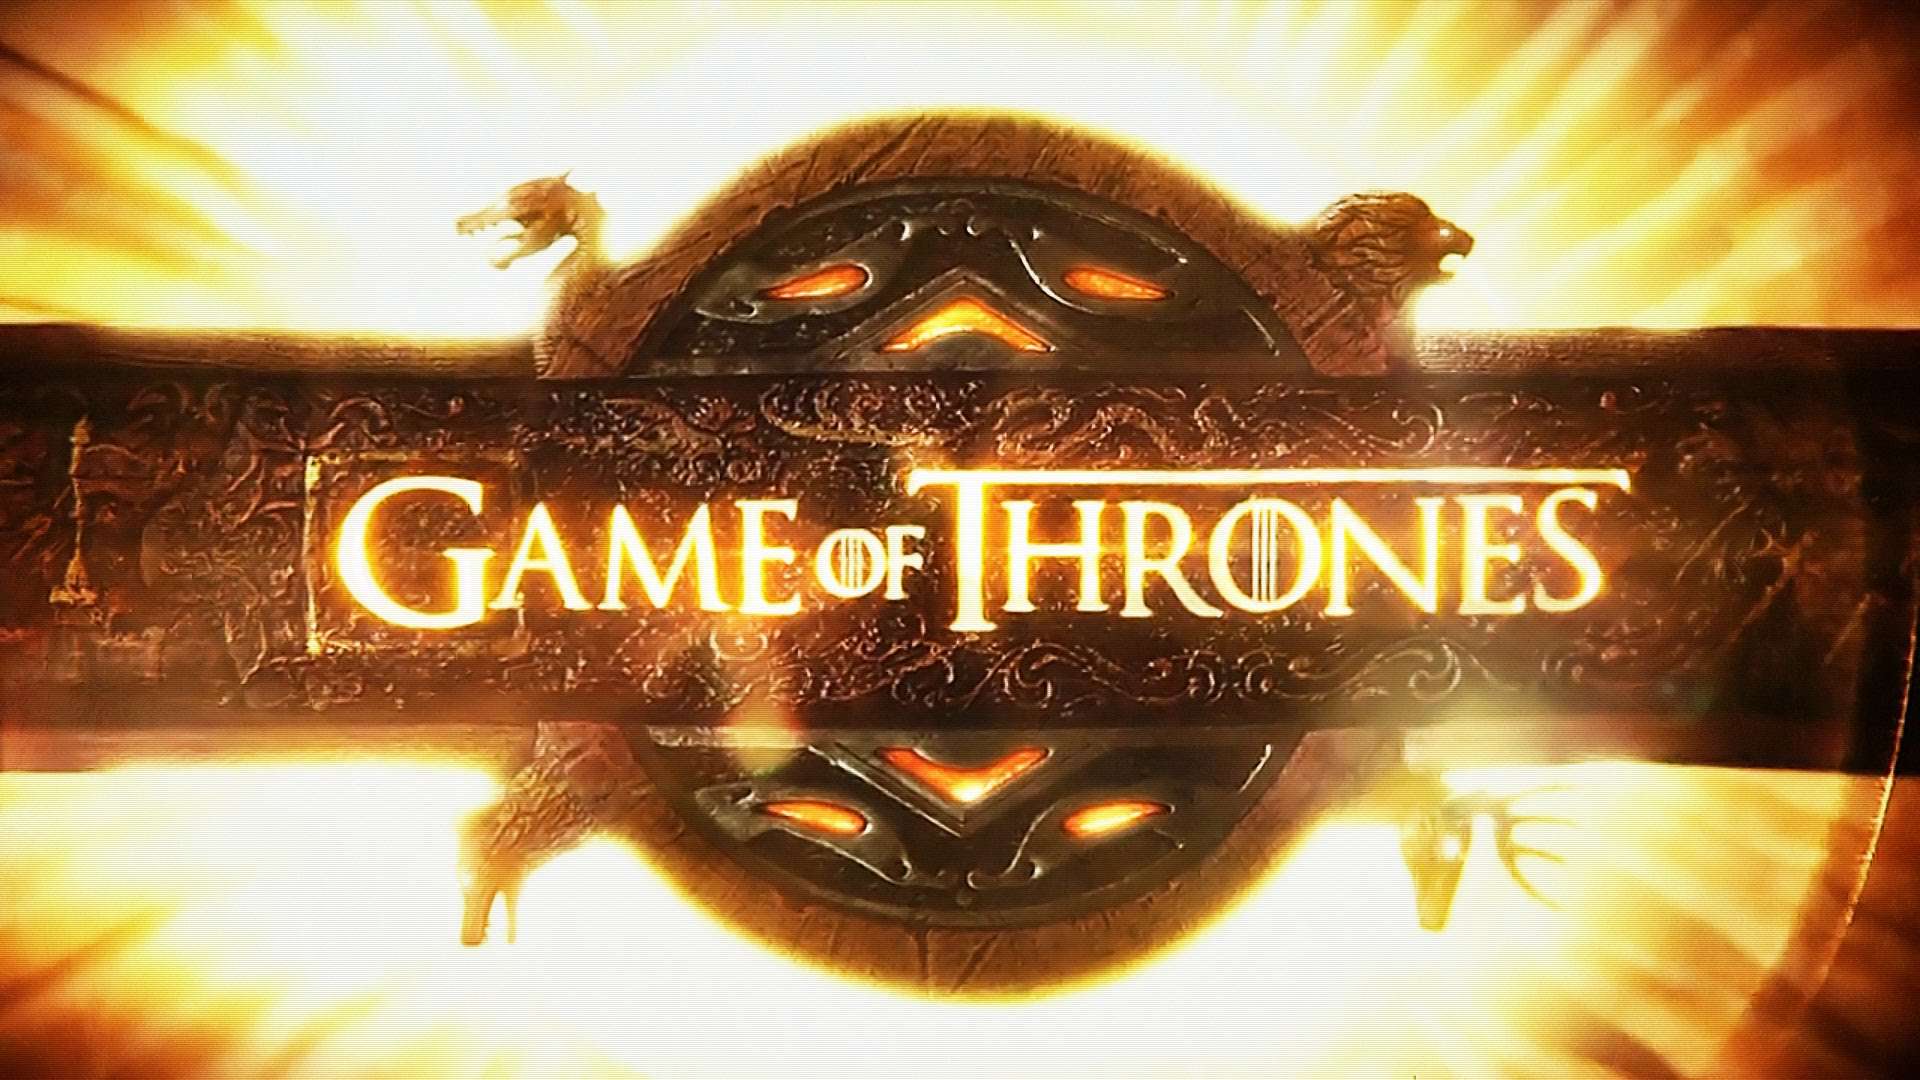 Anyone can create the Game of Thrones song in Garageband.